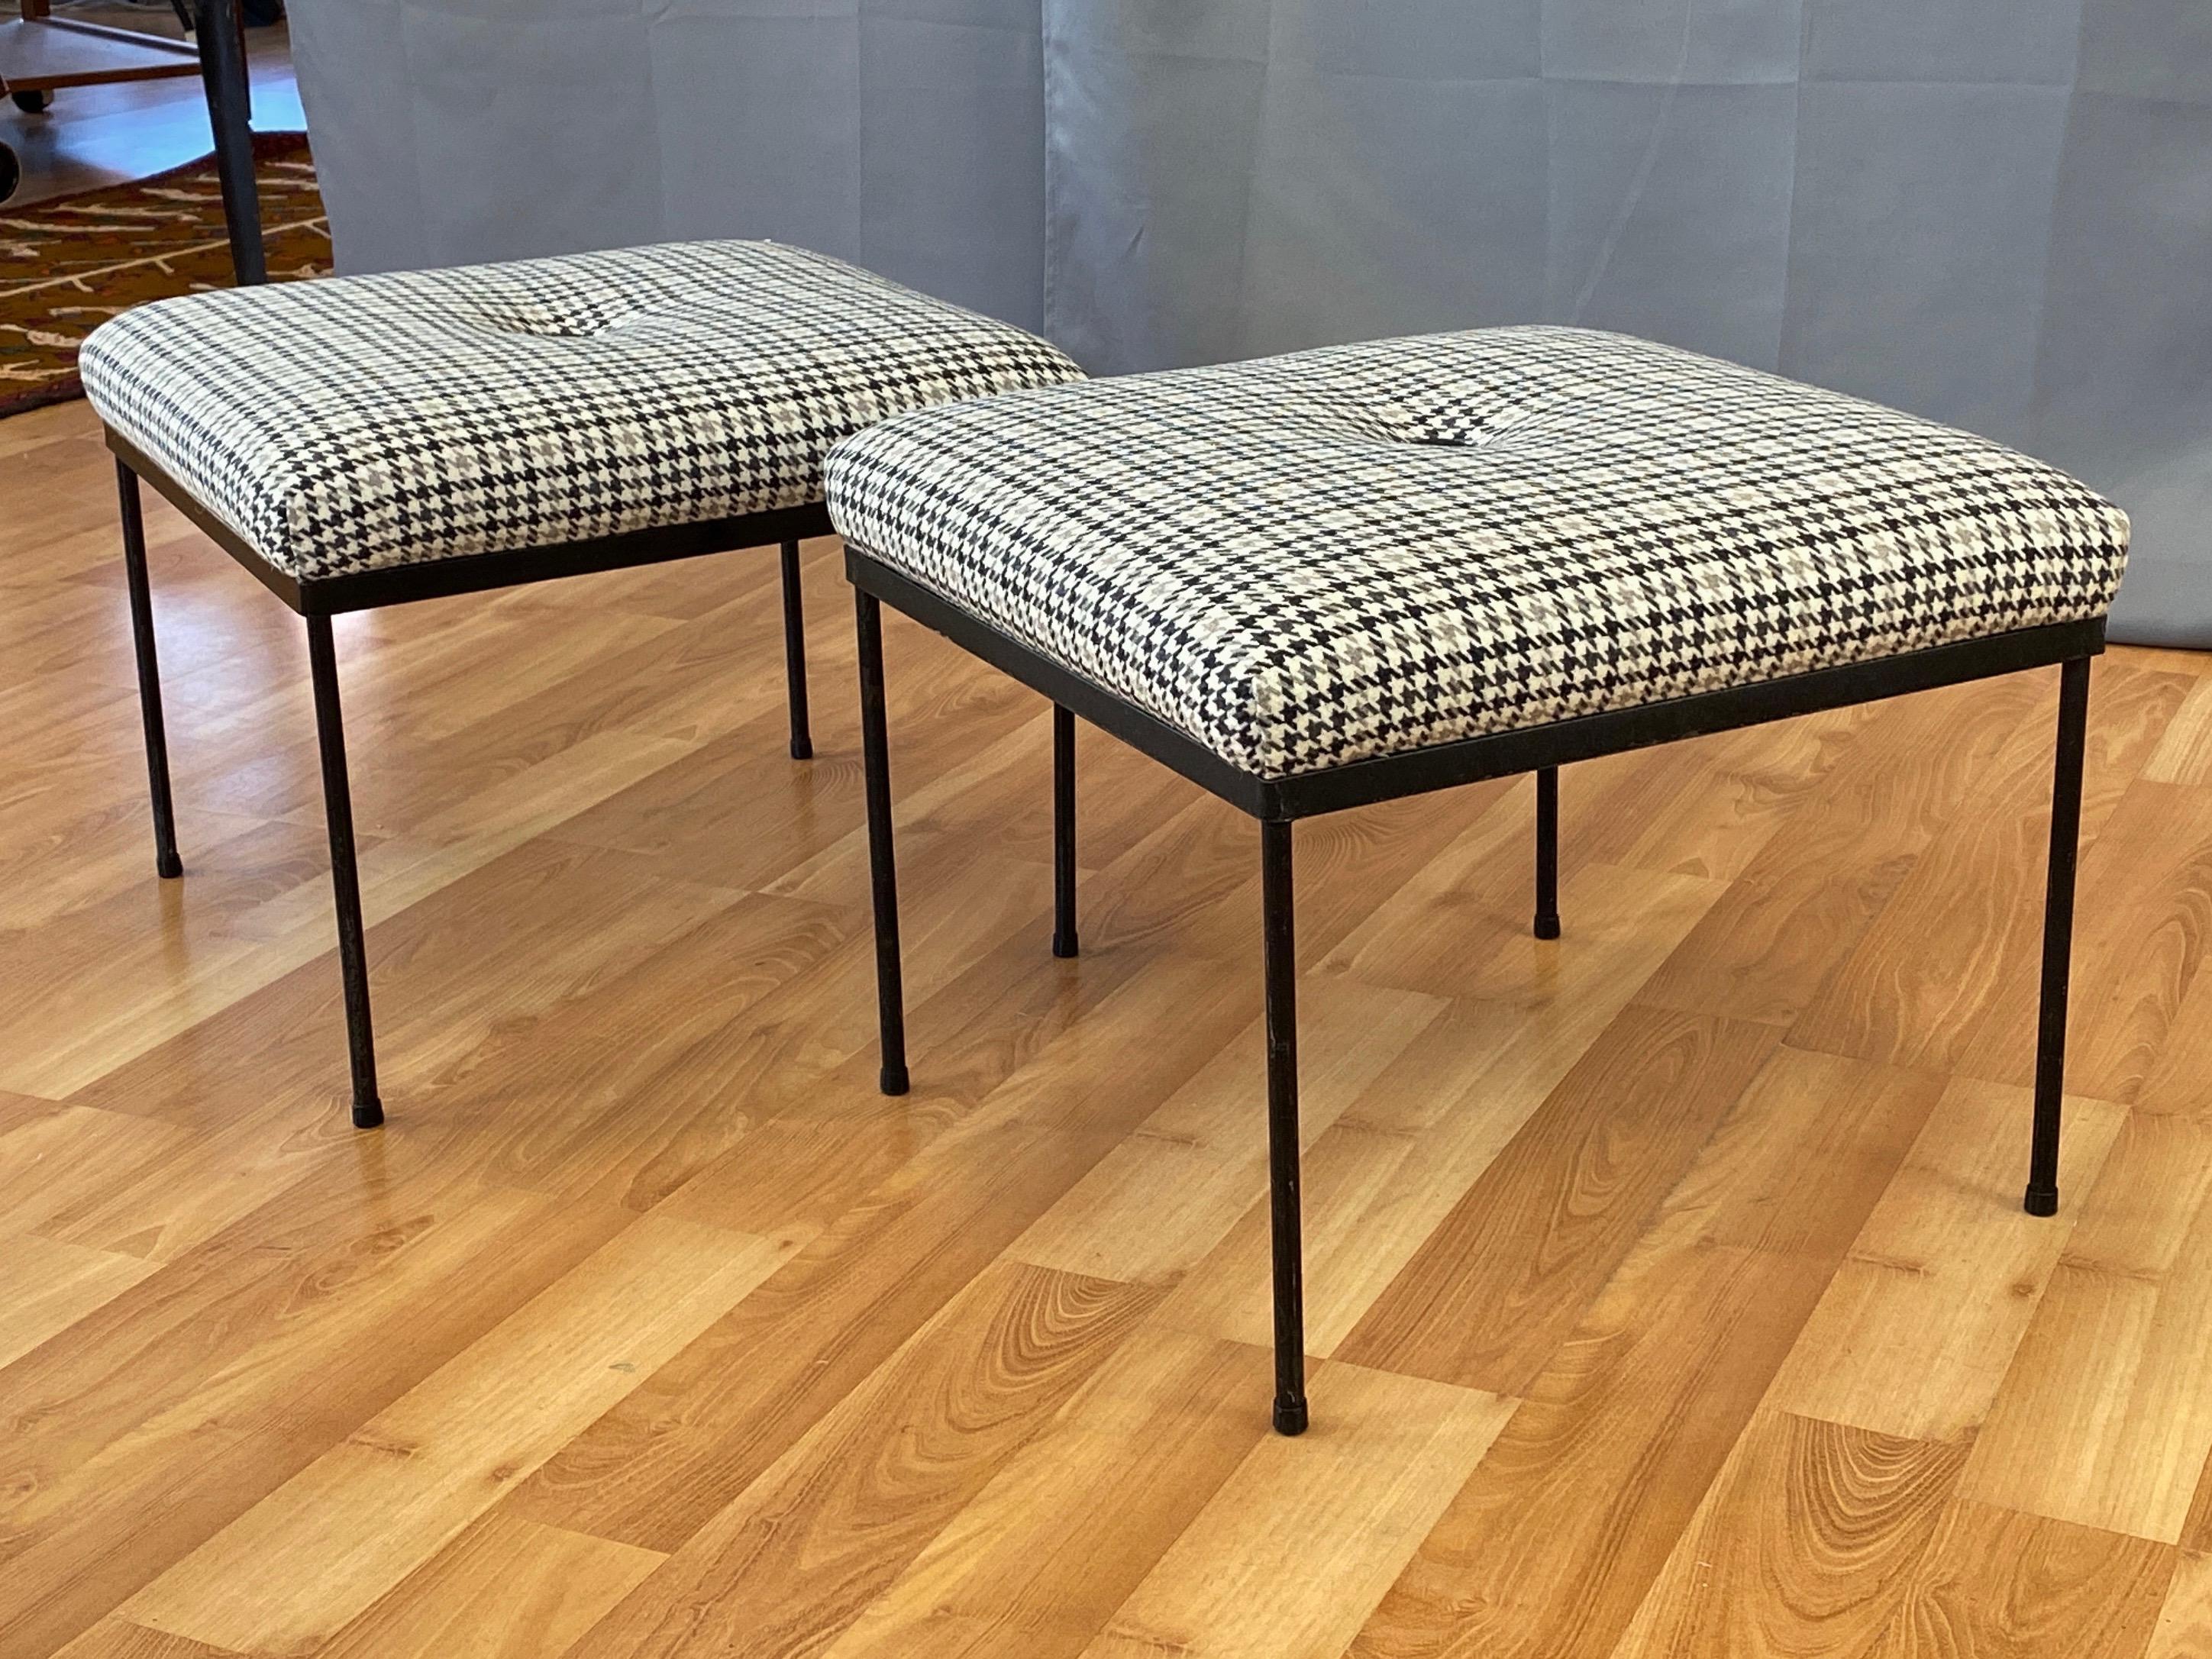 Mid-20th Century Pair of Paul McCobb-Style Houndstooth Upholstered Ottomans by Mallin, 1950s